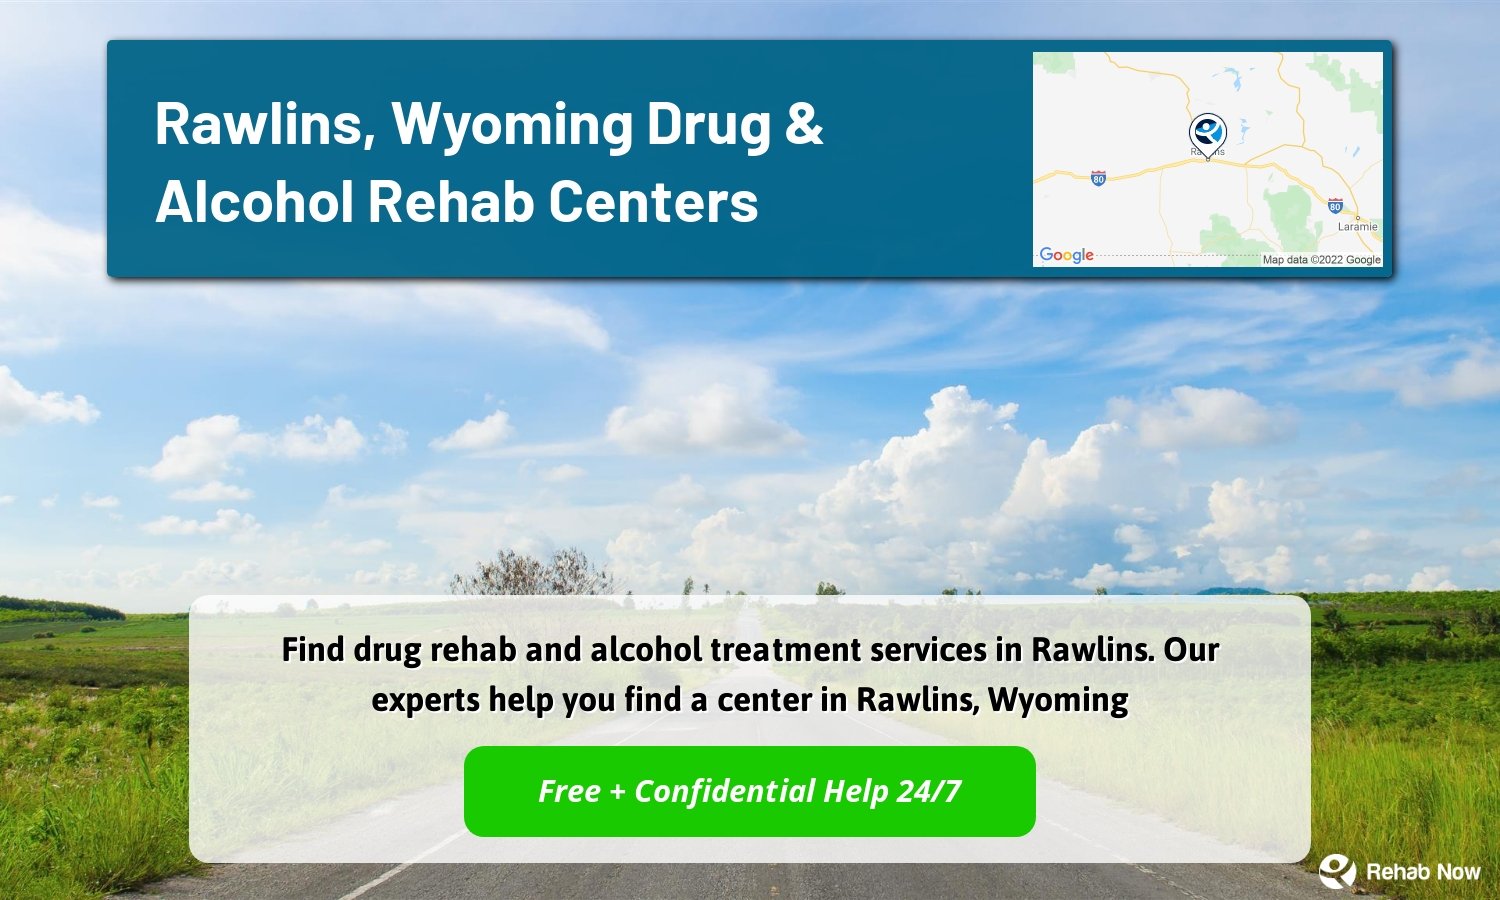 Find drug rehab and alcohol treatment services in Rawlins. Our experts help you find a center in Rawlins, Wyoming